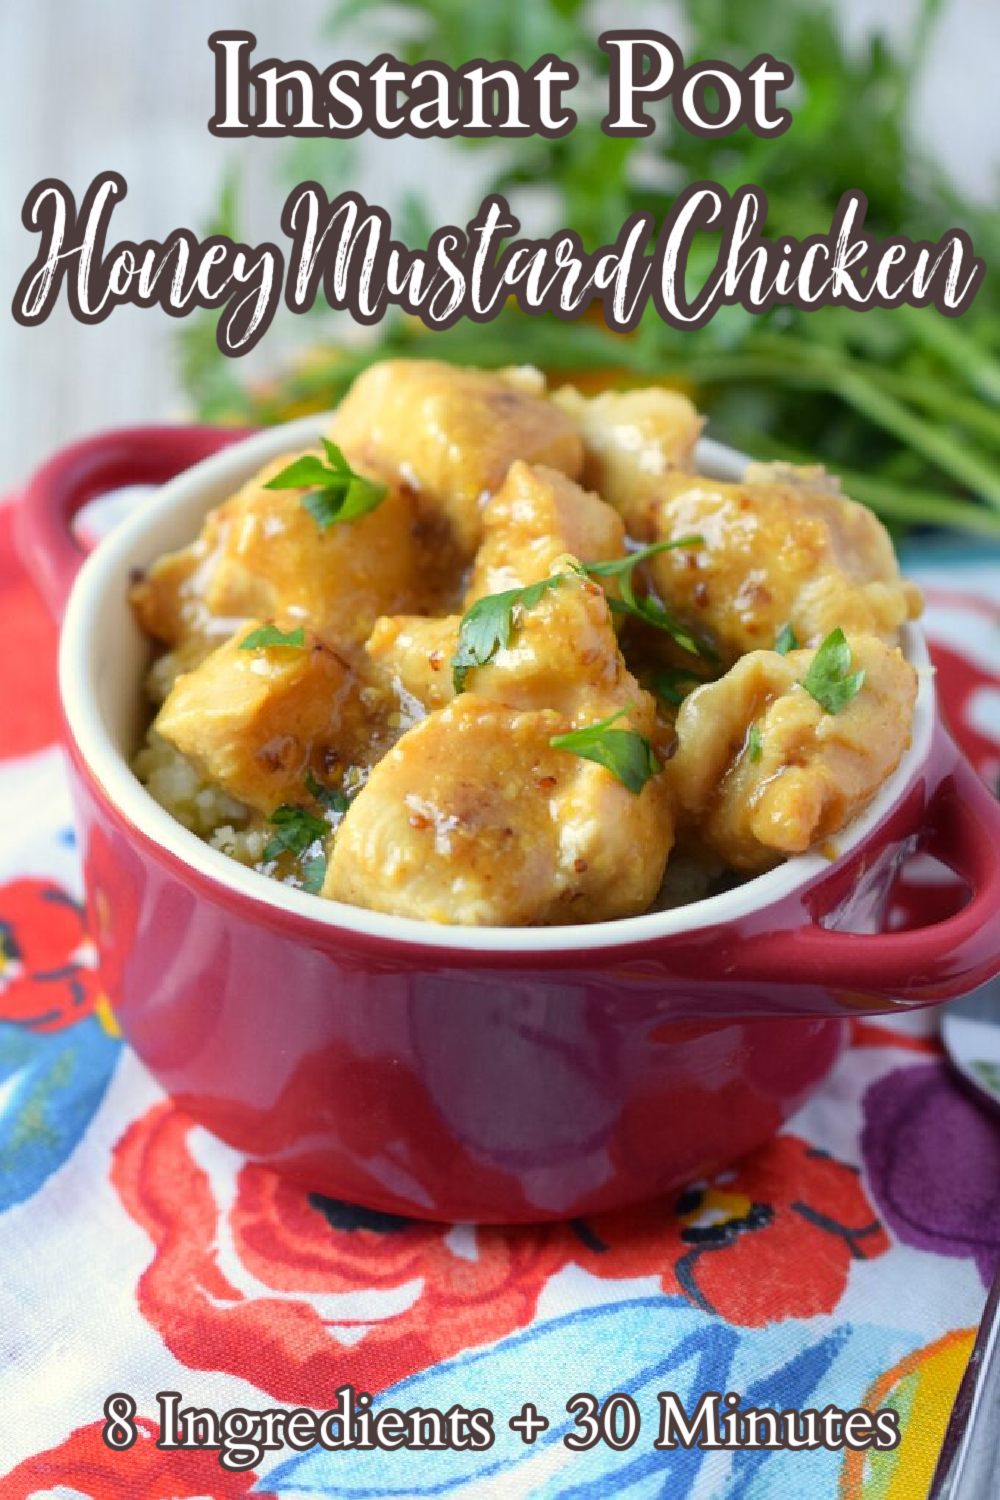 Instant Pot Honey Mustard Chicken - A quick and easy meal ready in less than 30 minutes. Sweet and tangy honey mustard sauce over chicken cooked right in the Instant Pot. Instant Pot Honey Mustard Chicken | Instant Pot Chicken | Honey Mustard Chicken